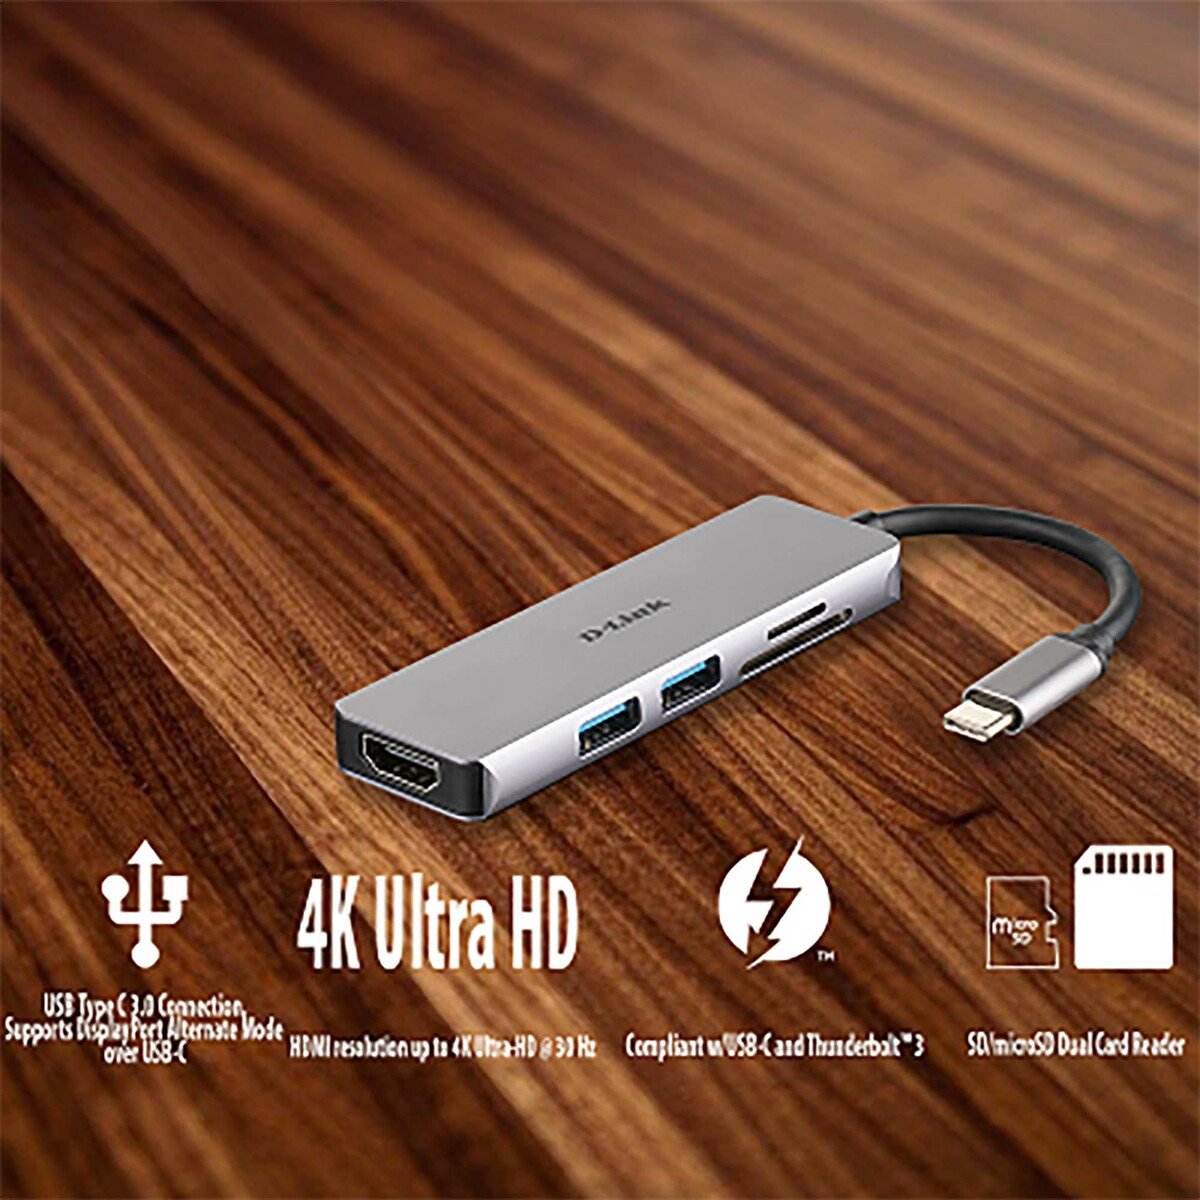 D-Link DUB-M530 5-in-1 USB-C Hub with HDMI and SDCard